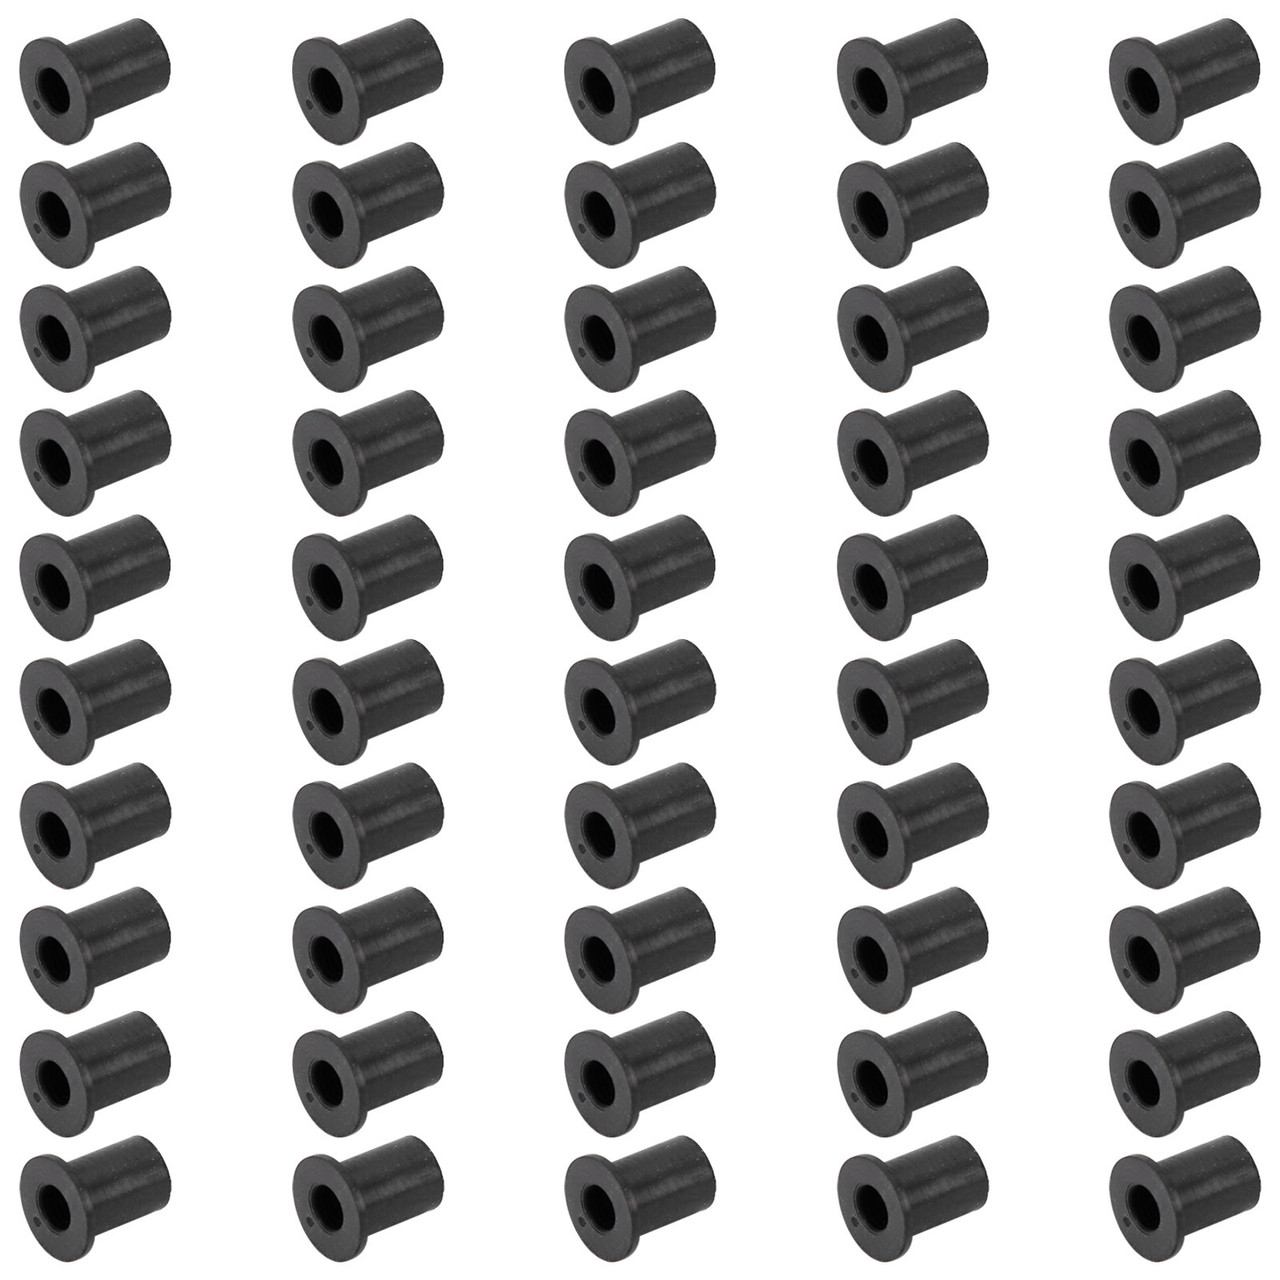 50pcs M5 Rubber Well Nuts Wellnuts for Fairing & Screen Fixing Pack of 10 - 10mm Hole